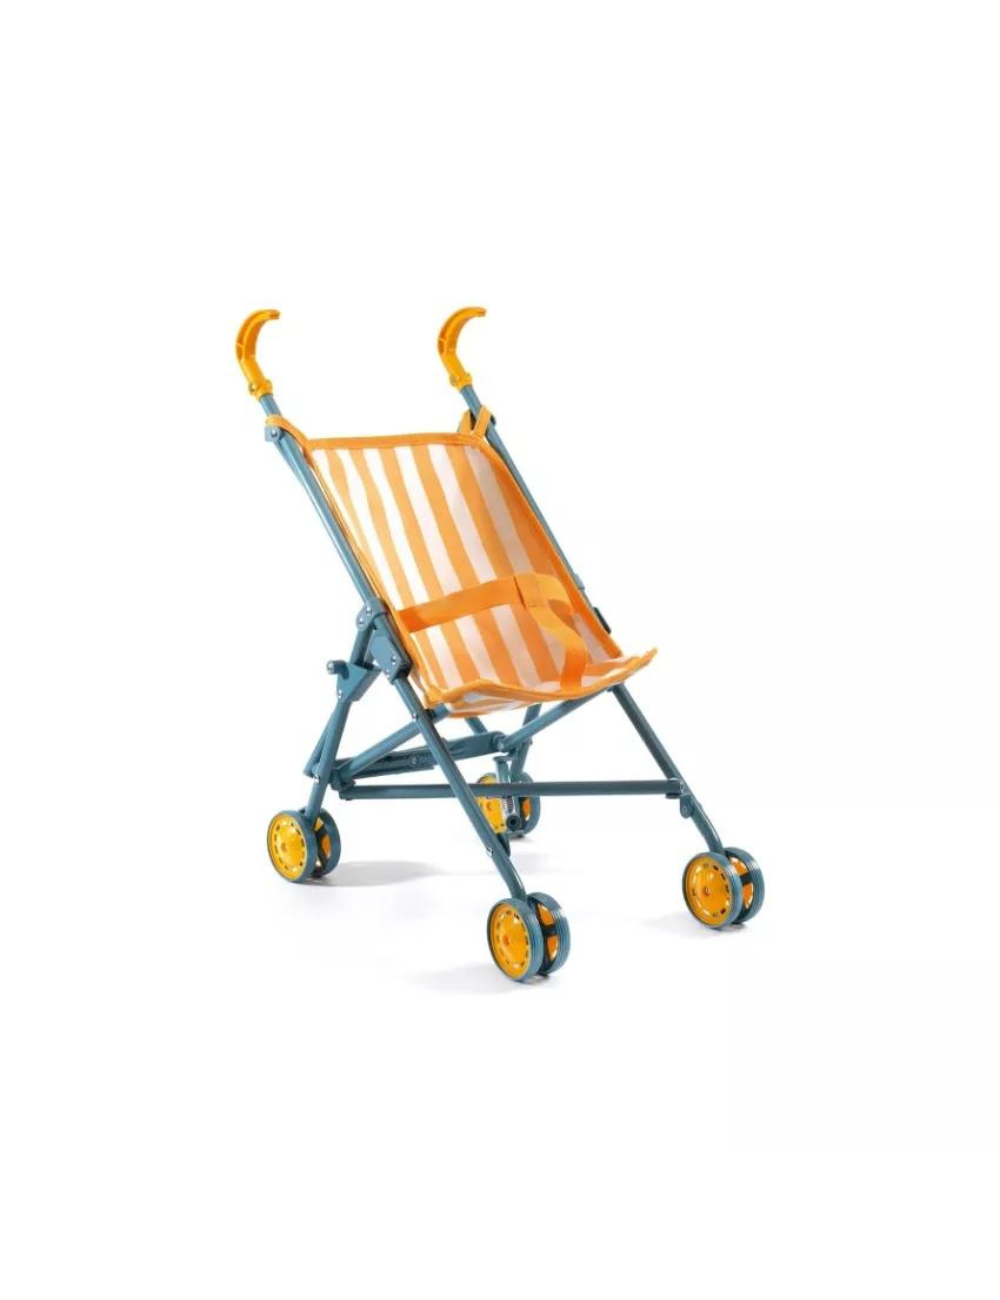 Sunshine Doll Stroller by Djeco